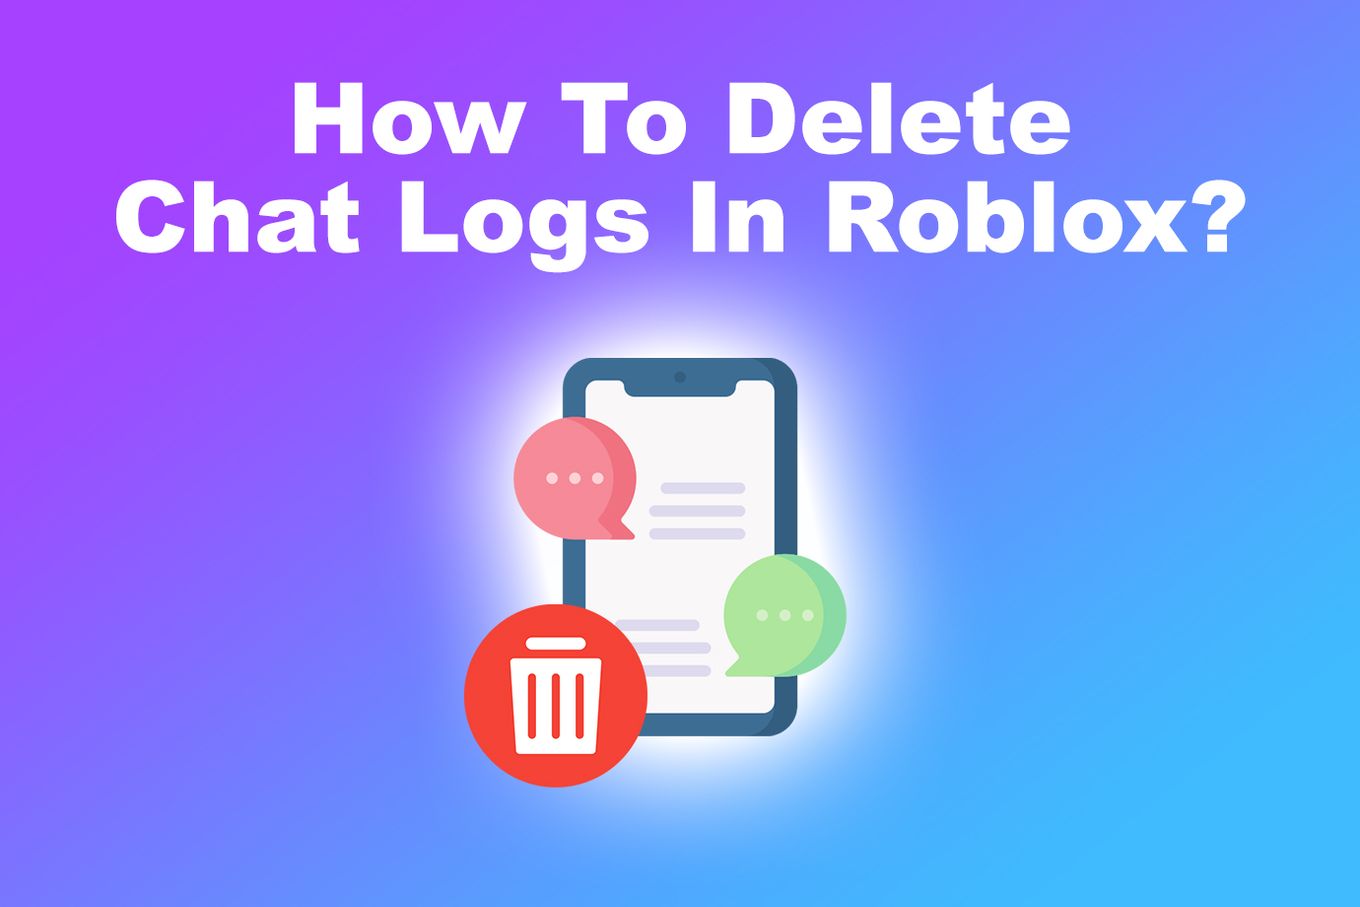 How To Delete Chat Logs In Roblox?